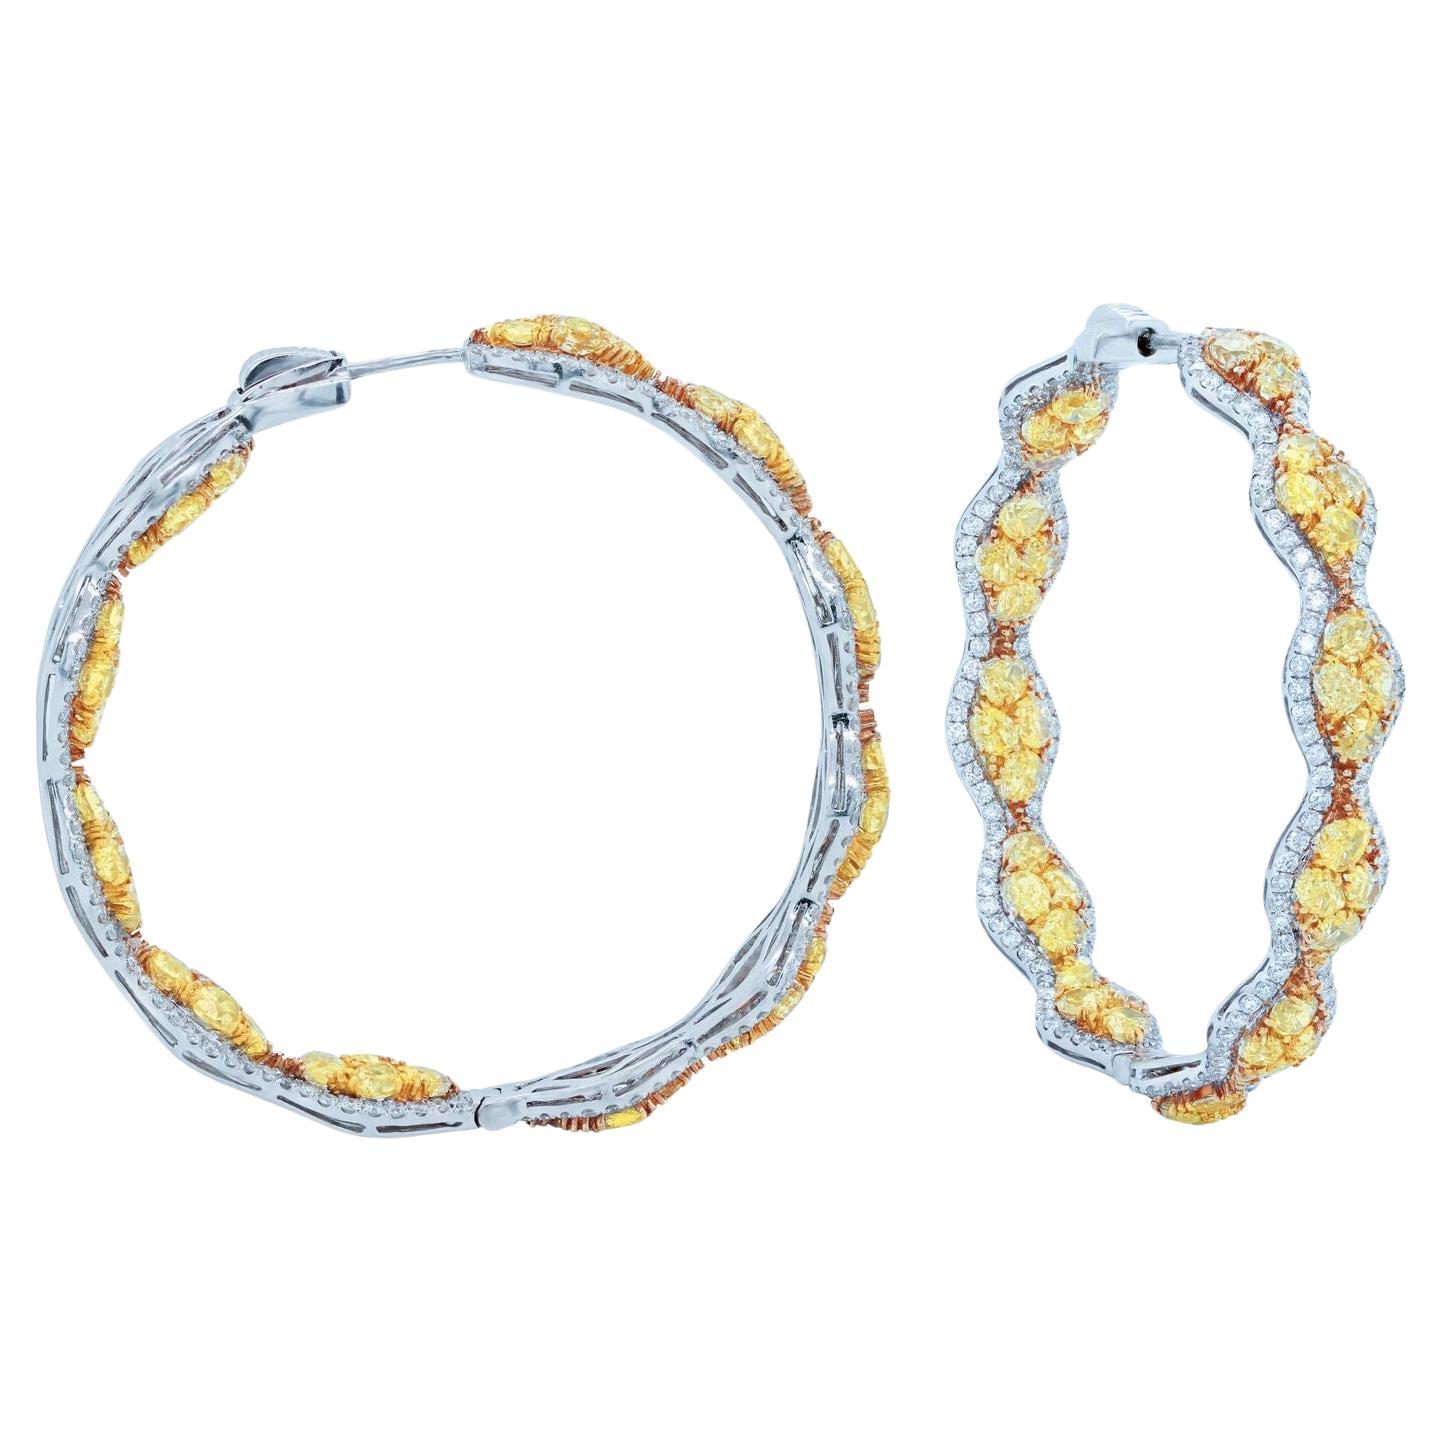 Diana M. 18 kt white and yellow gold inside-out hoop earrings  For Sale